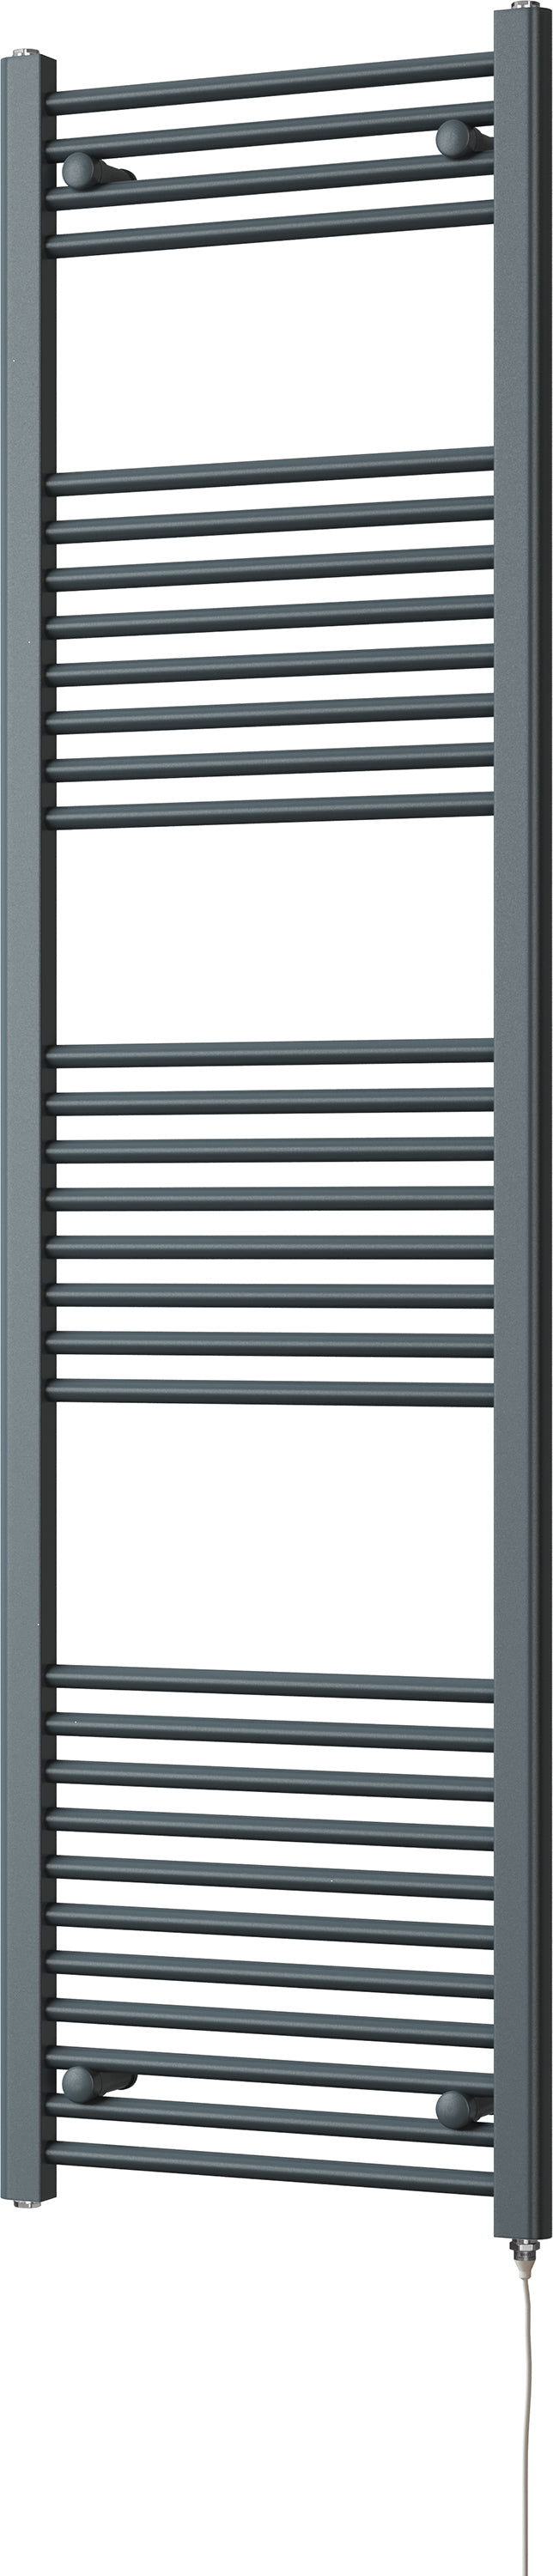 Zennor - Anthracite Electric Towel Rail H1800mm x W500mm Straight 600w Standard